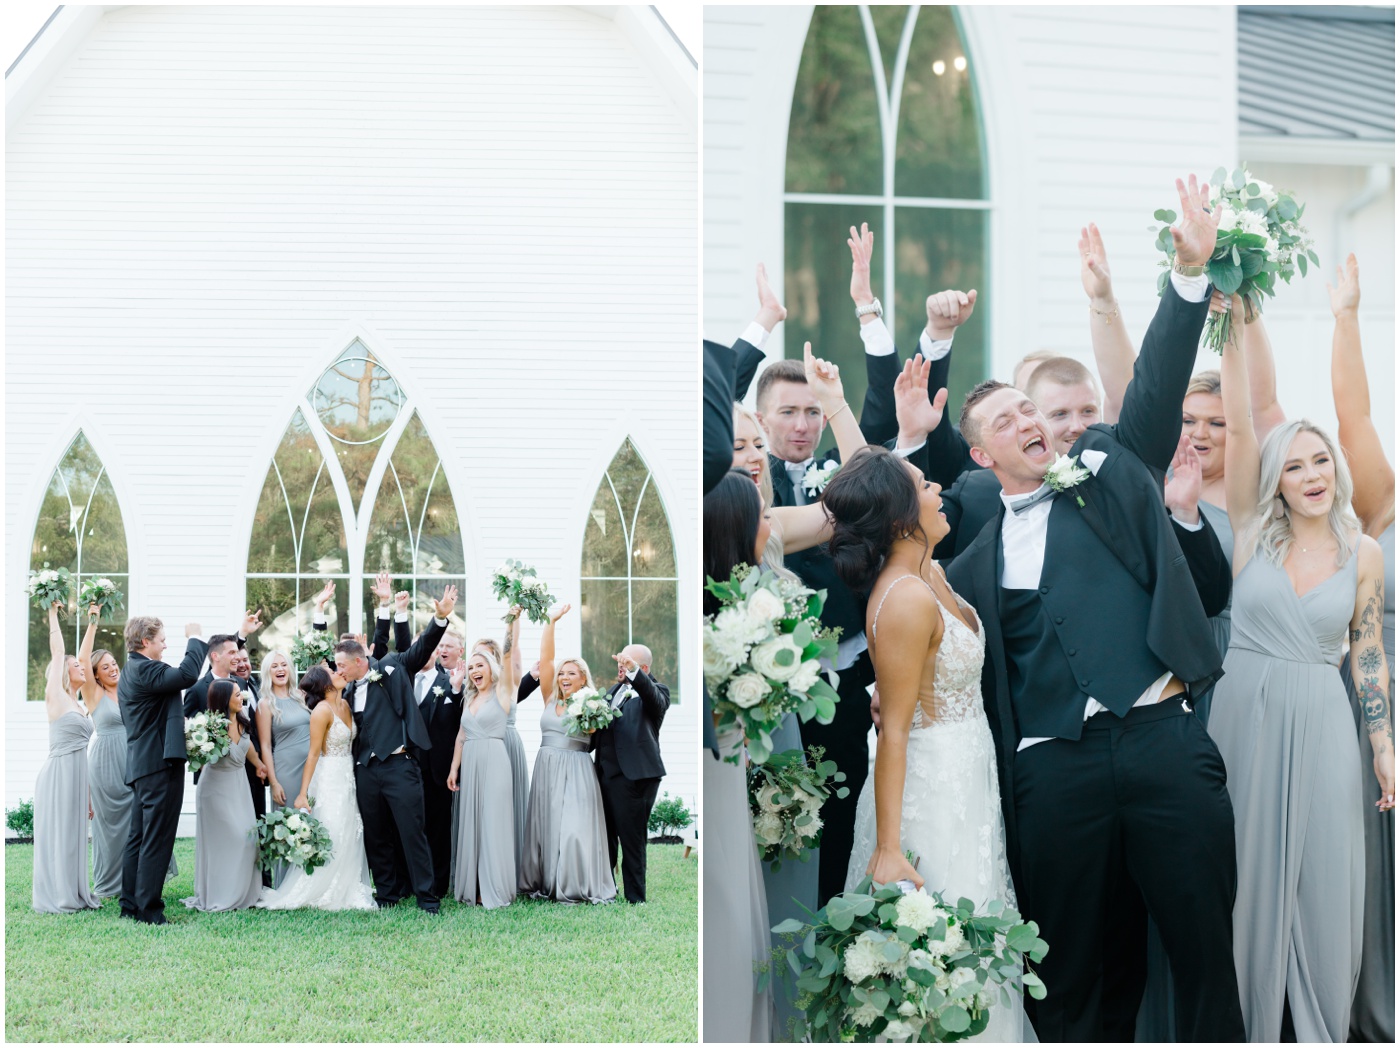 wedding photographer in Texas captures the bride and groom celebrating with their wedding party